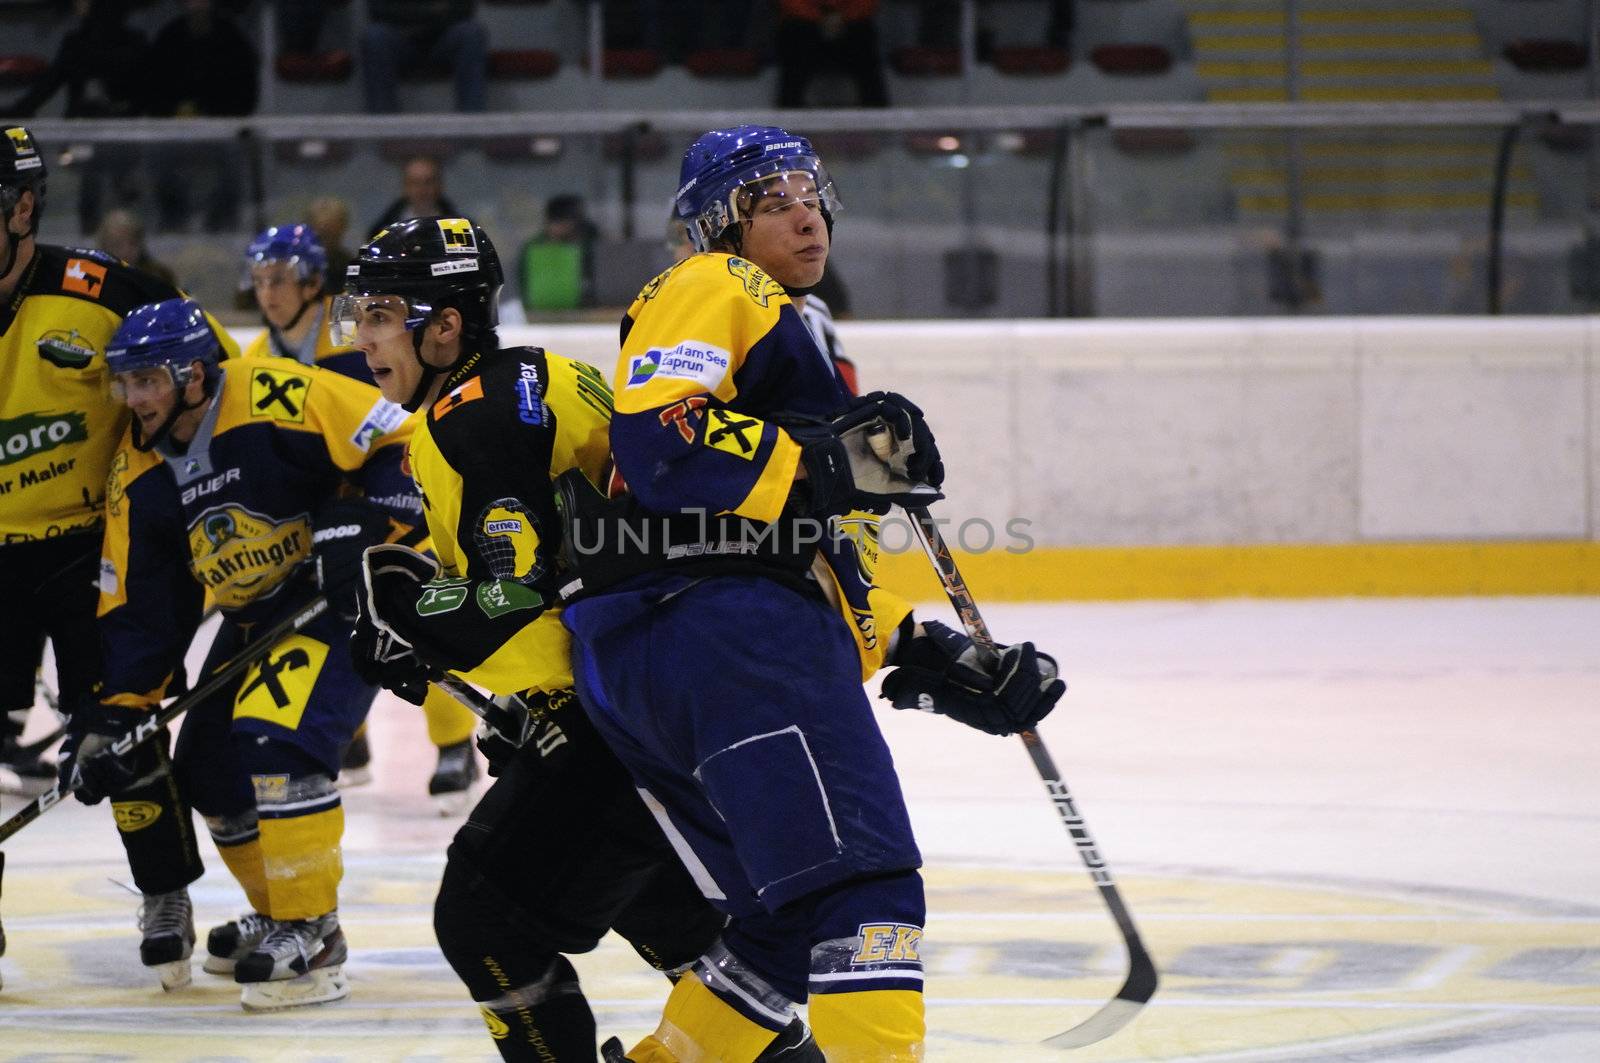 ZELL AM SEE; AUSTRIA - SEPT 24: Austrian National League. The team of EKZ (blue jersey) and the team of Lustenau fight for ervery inch on the ice. Game EK Zell am See vs EHC Lustenau (Result 1-8) on September 24, 2011 in Zell am See.